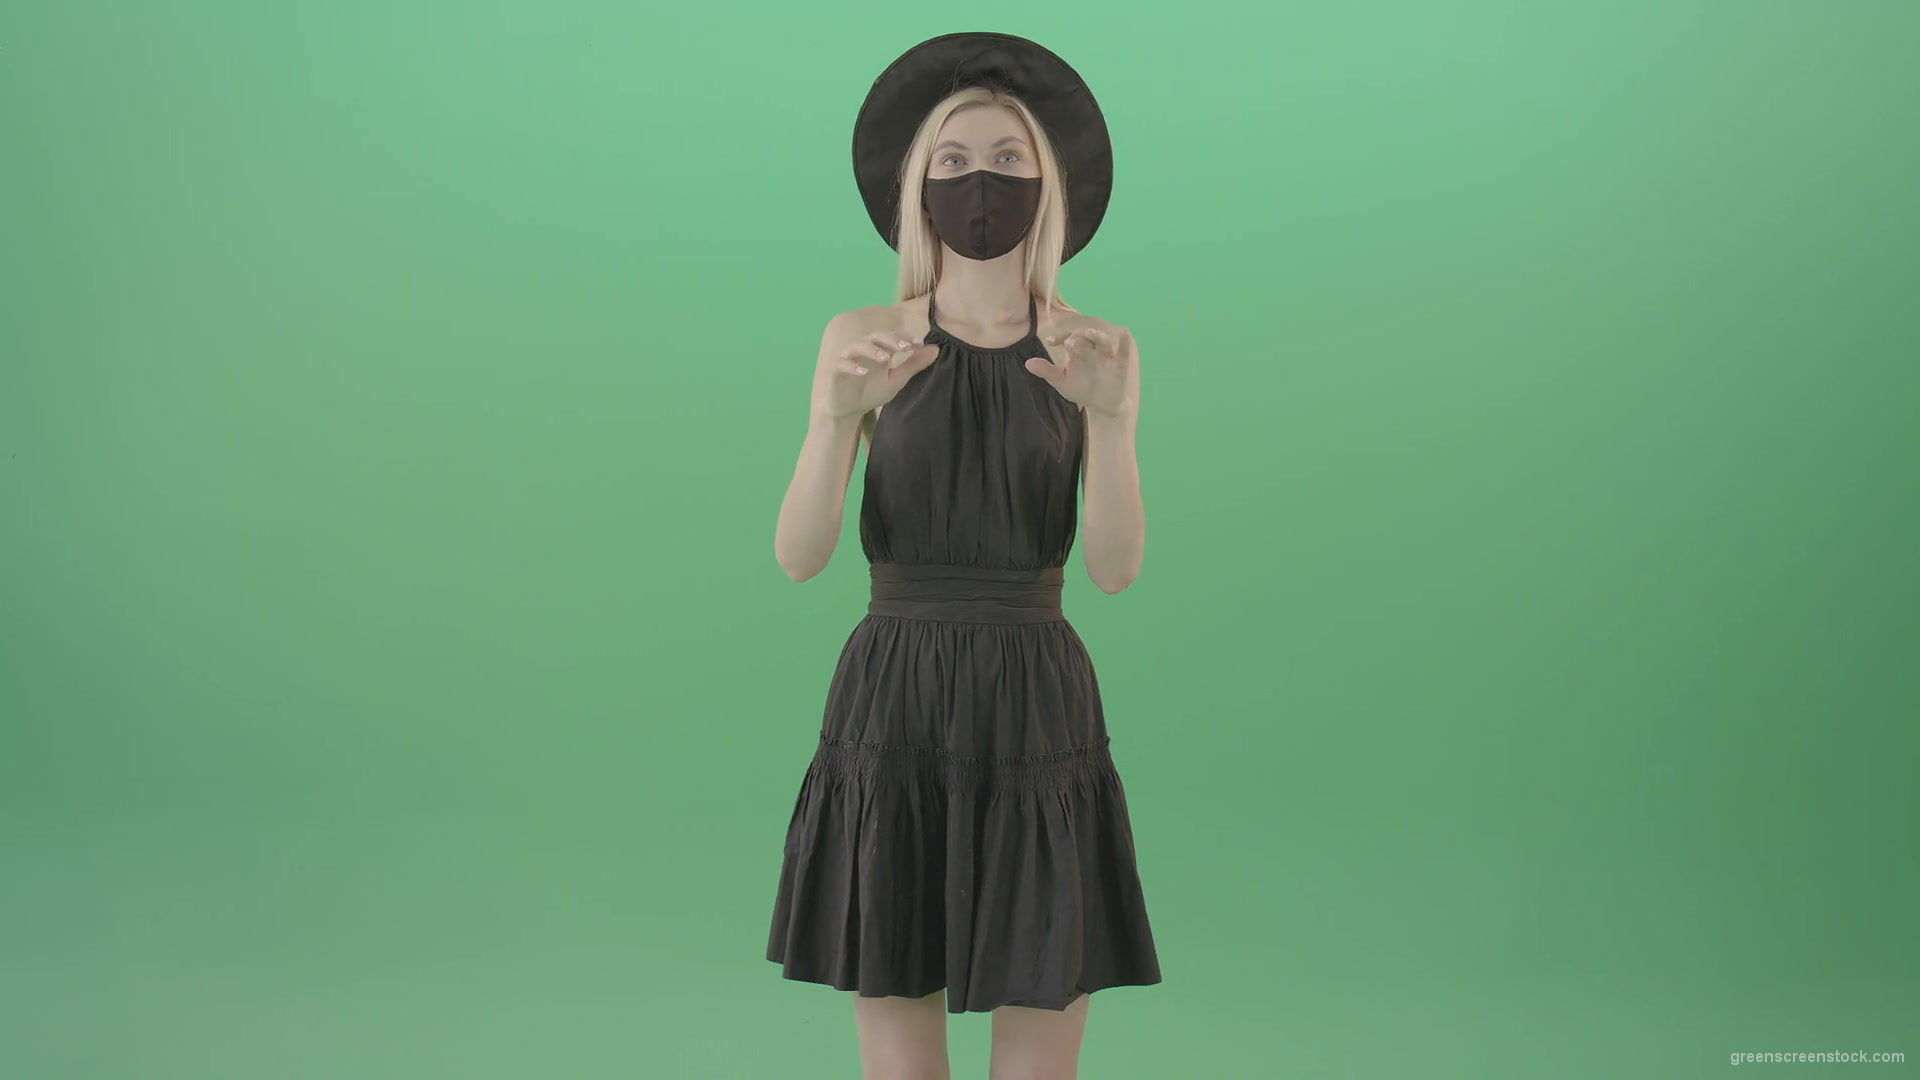 Covid-19-girl-in-black-mask-working-on-virtual-keyboard-buttons-and-touch-screen-on-green-background-4K-Video-Footage-1920_006 Green Screen Stock